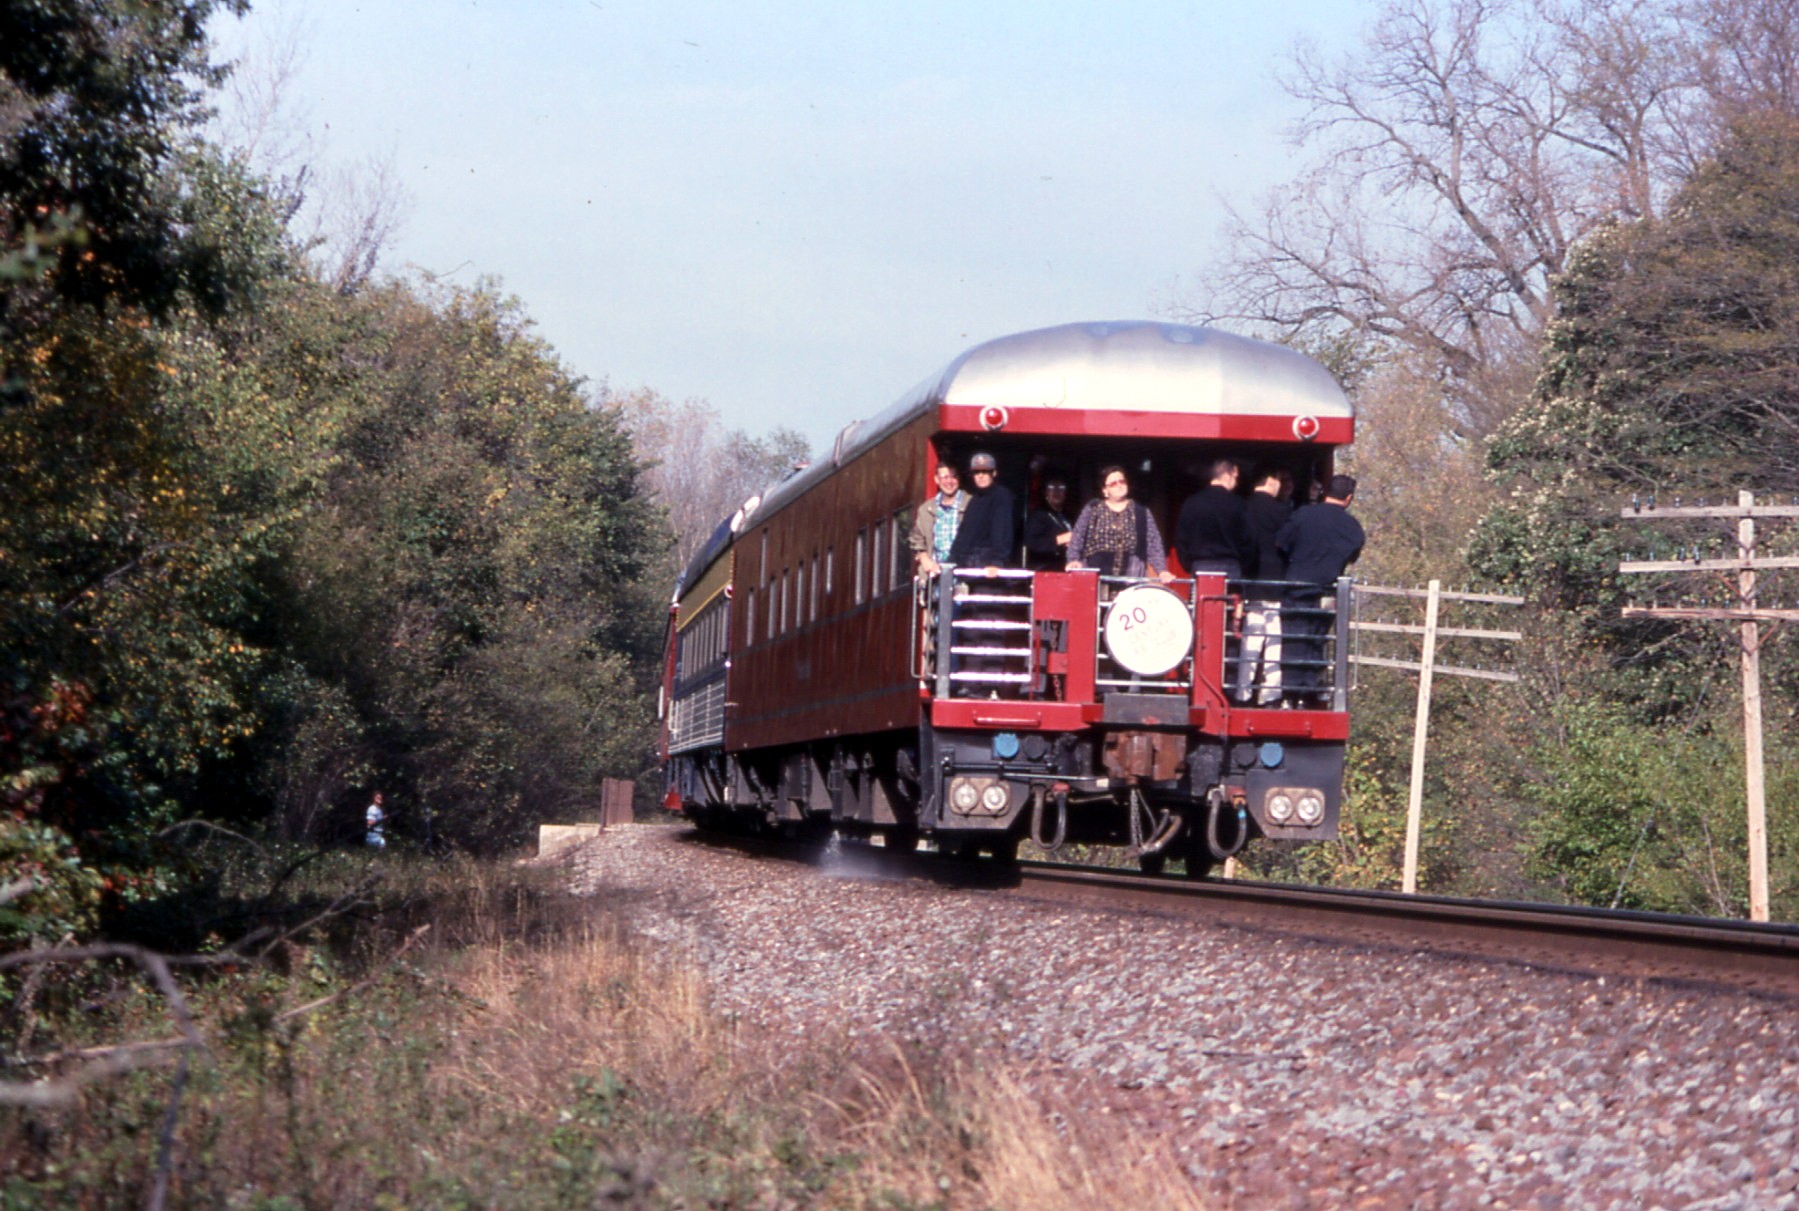 three people are riding on the side of a train going down the track